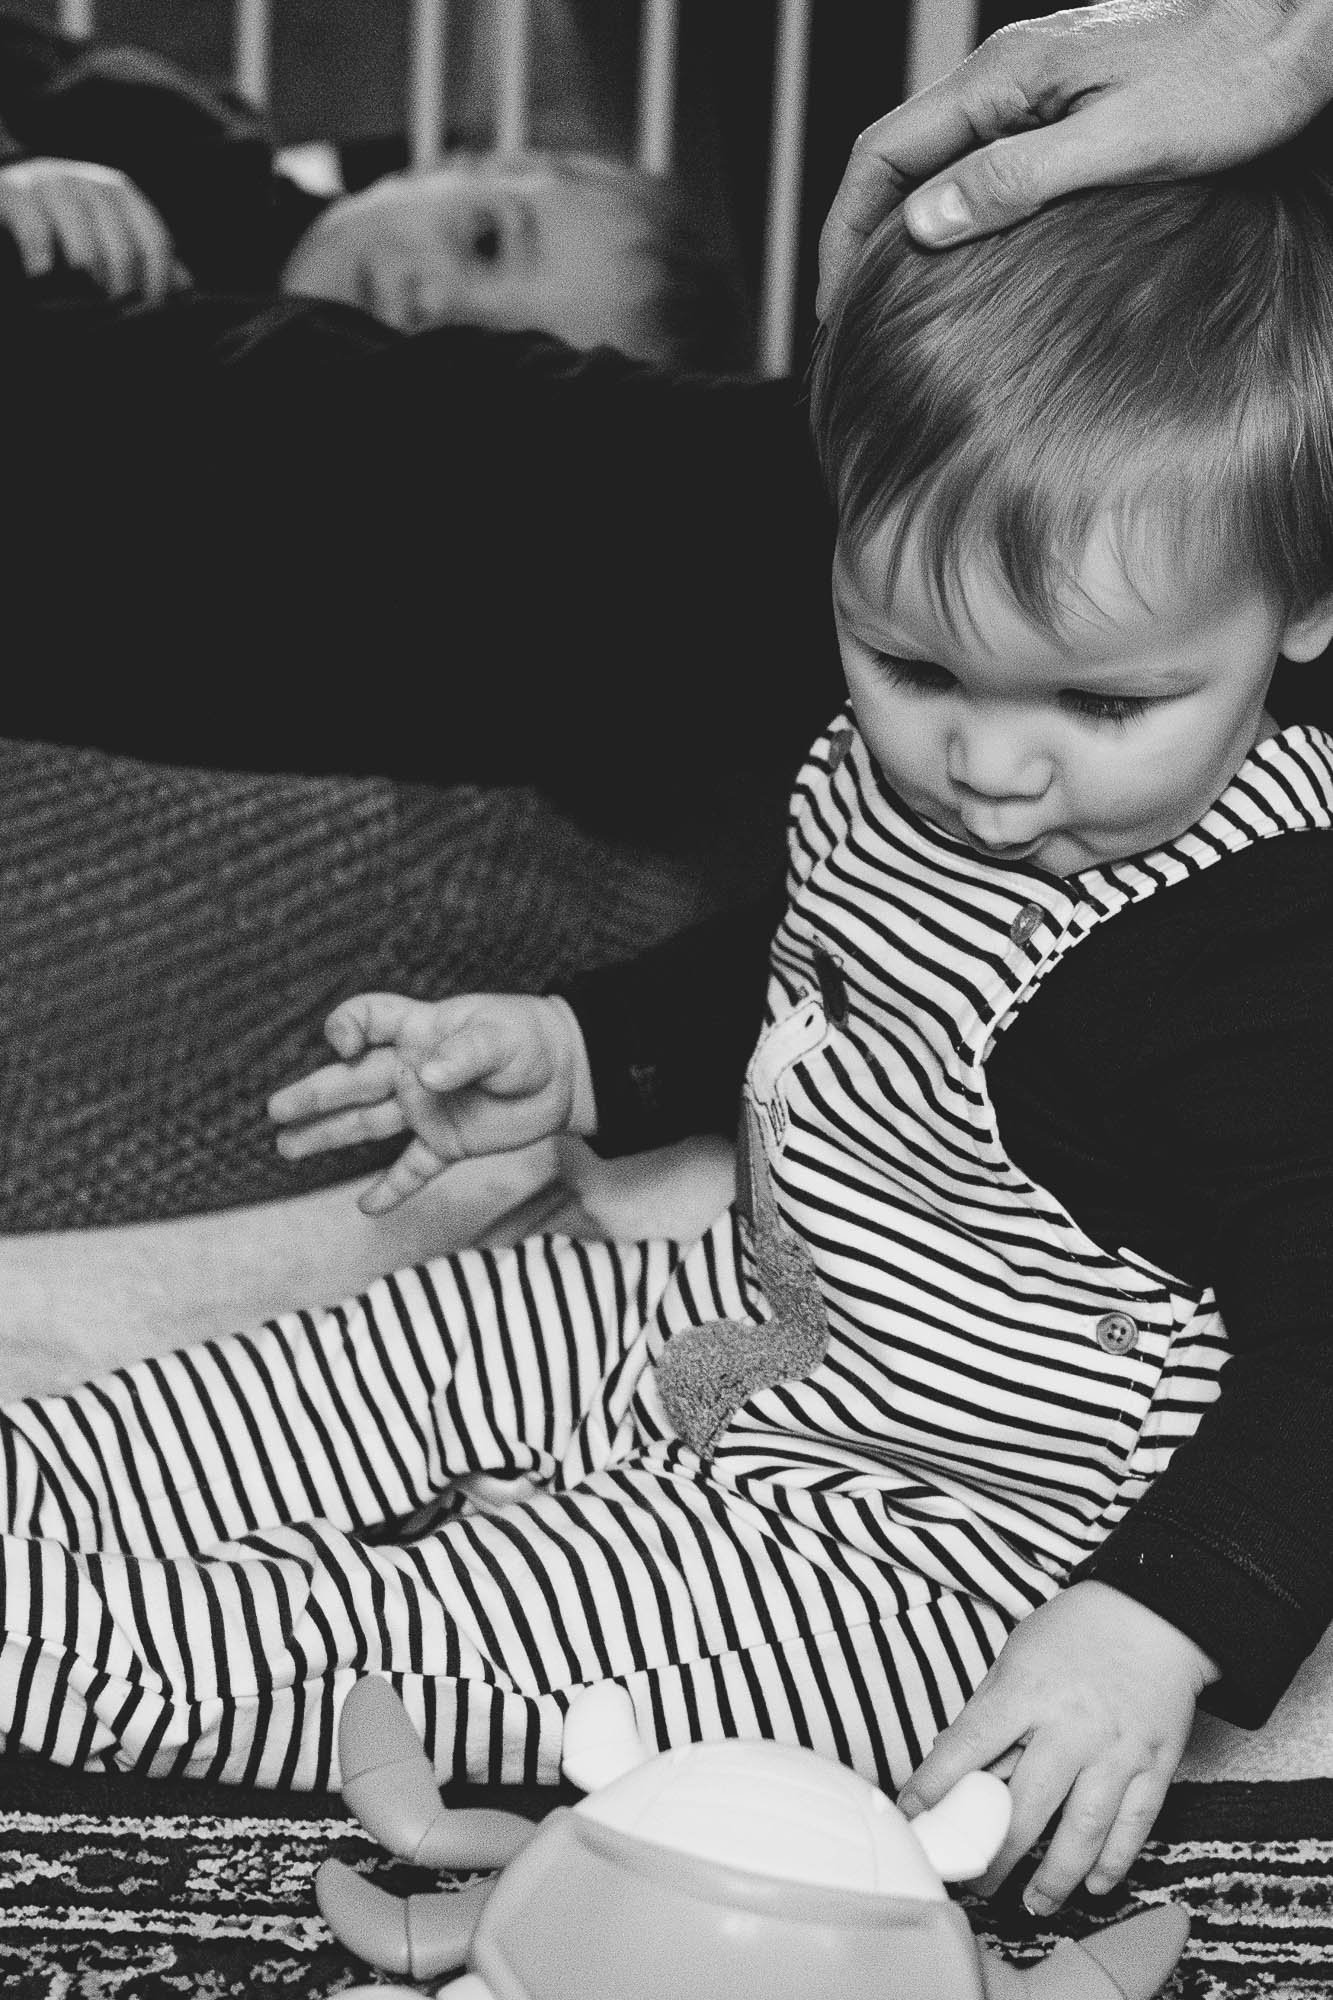 first-birthday-photoshoot-at-home-london-reportage-birthday-boy-and-sibling-black-and-white.jpg